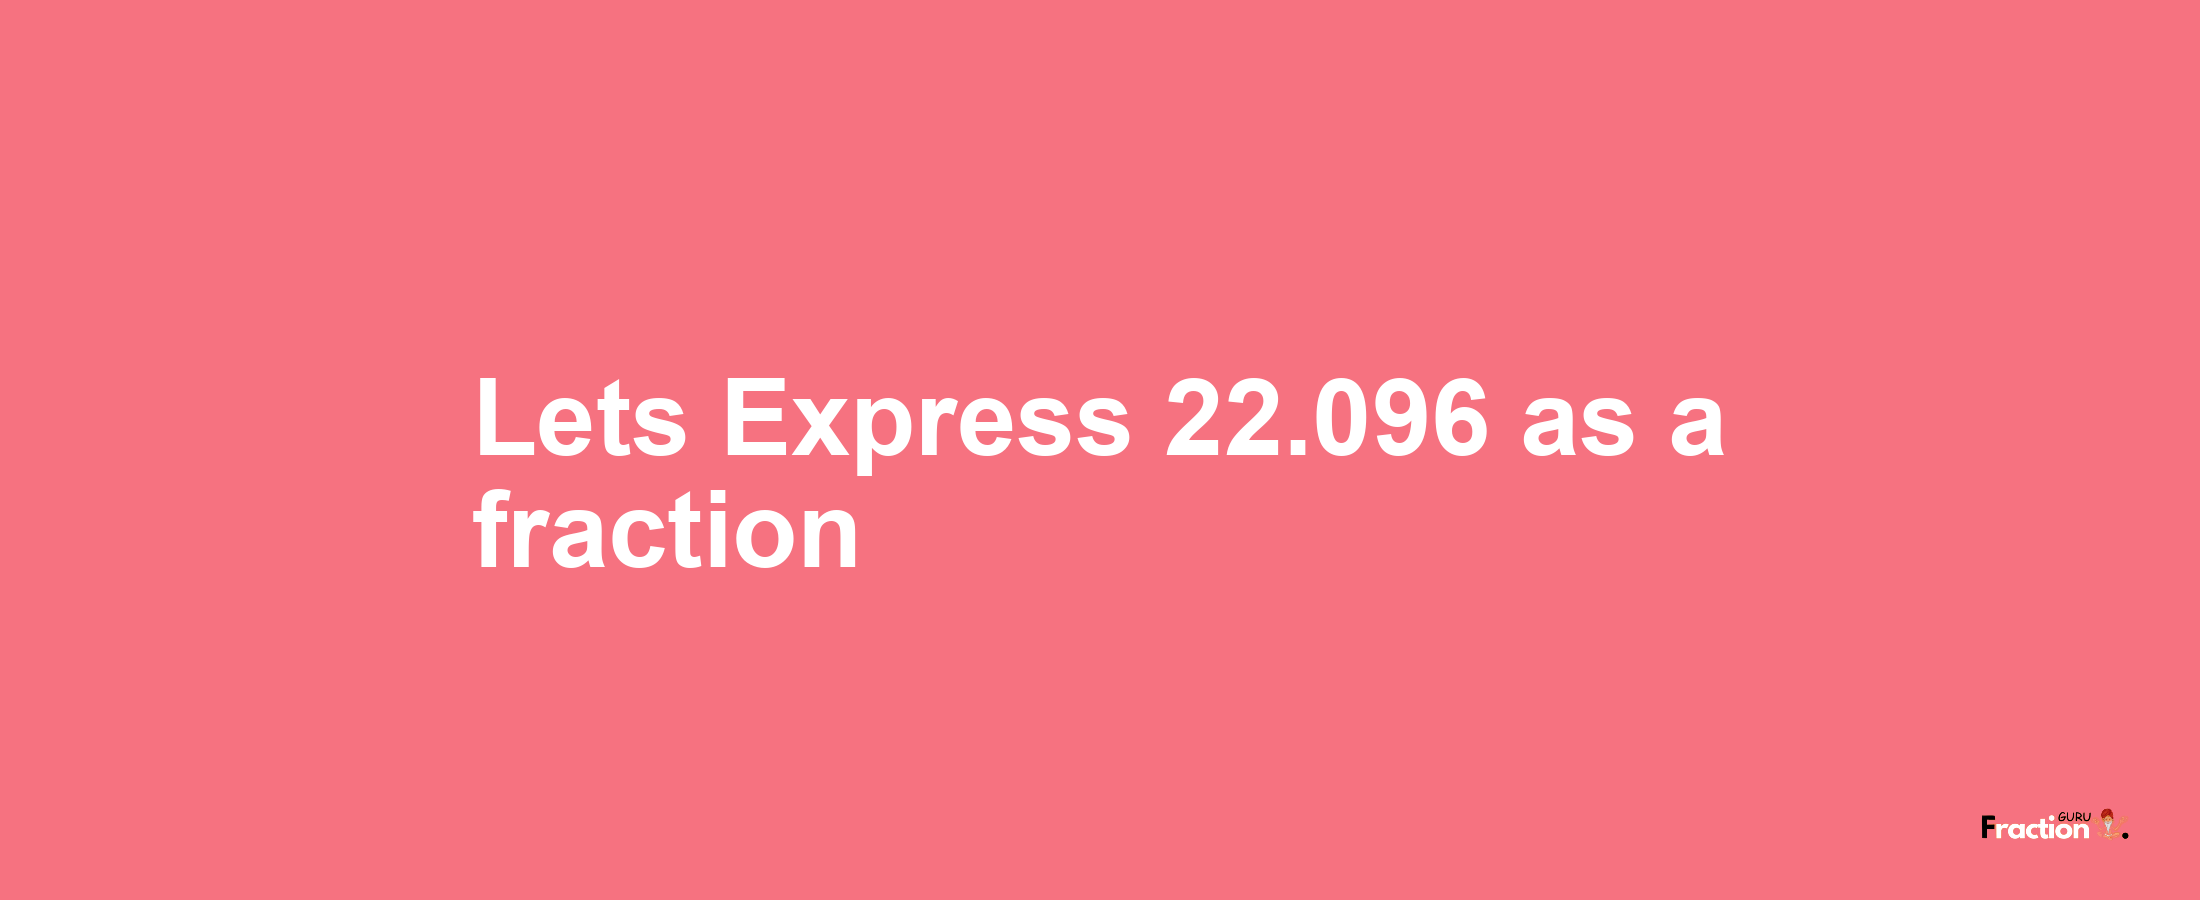 Lets Express 22.096 as afraction